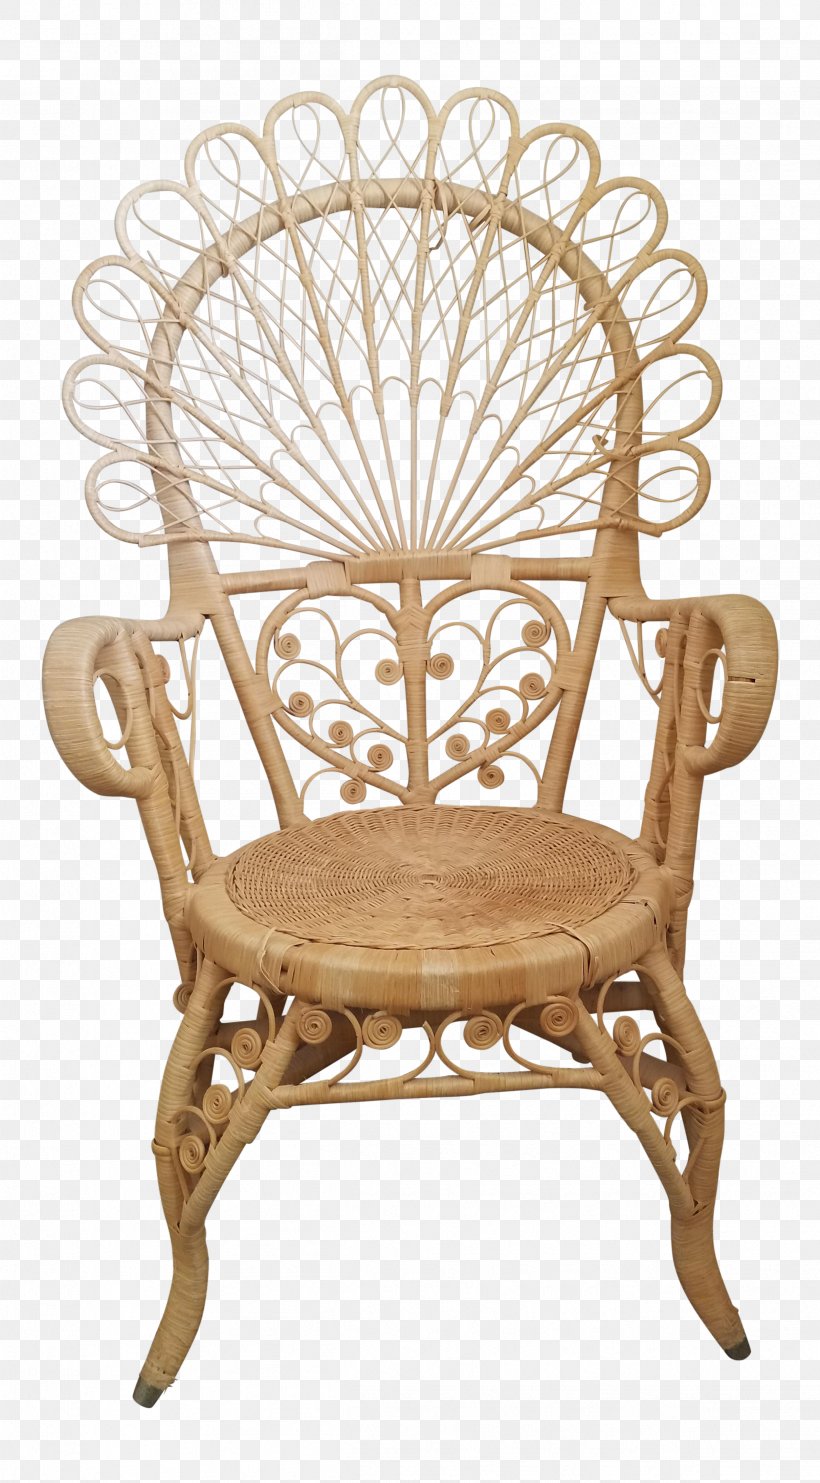 Table Chair, PNG, 2423x4384px, Table, Chair, Furniture, Outdoor Furniture, Outdoor Table Download Free